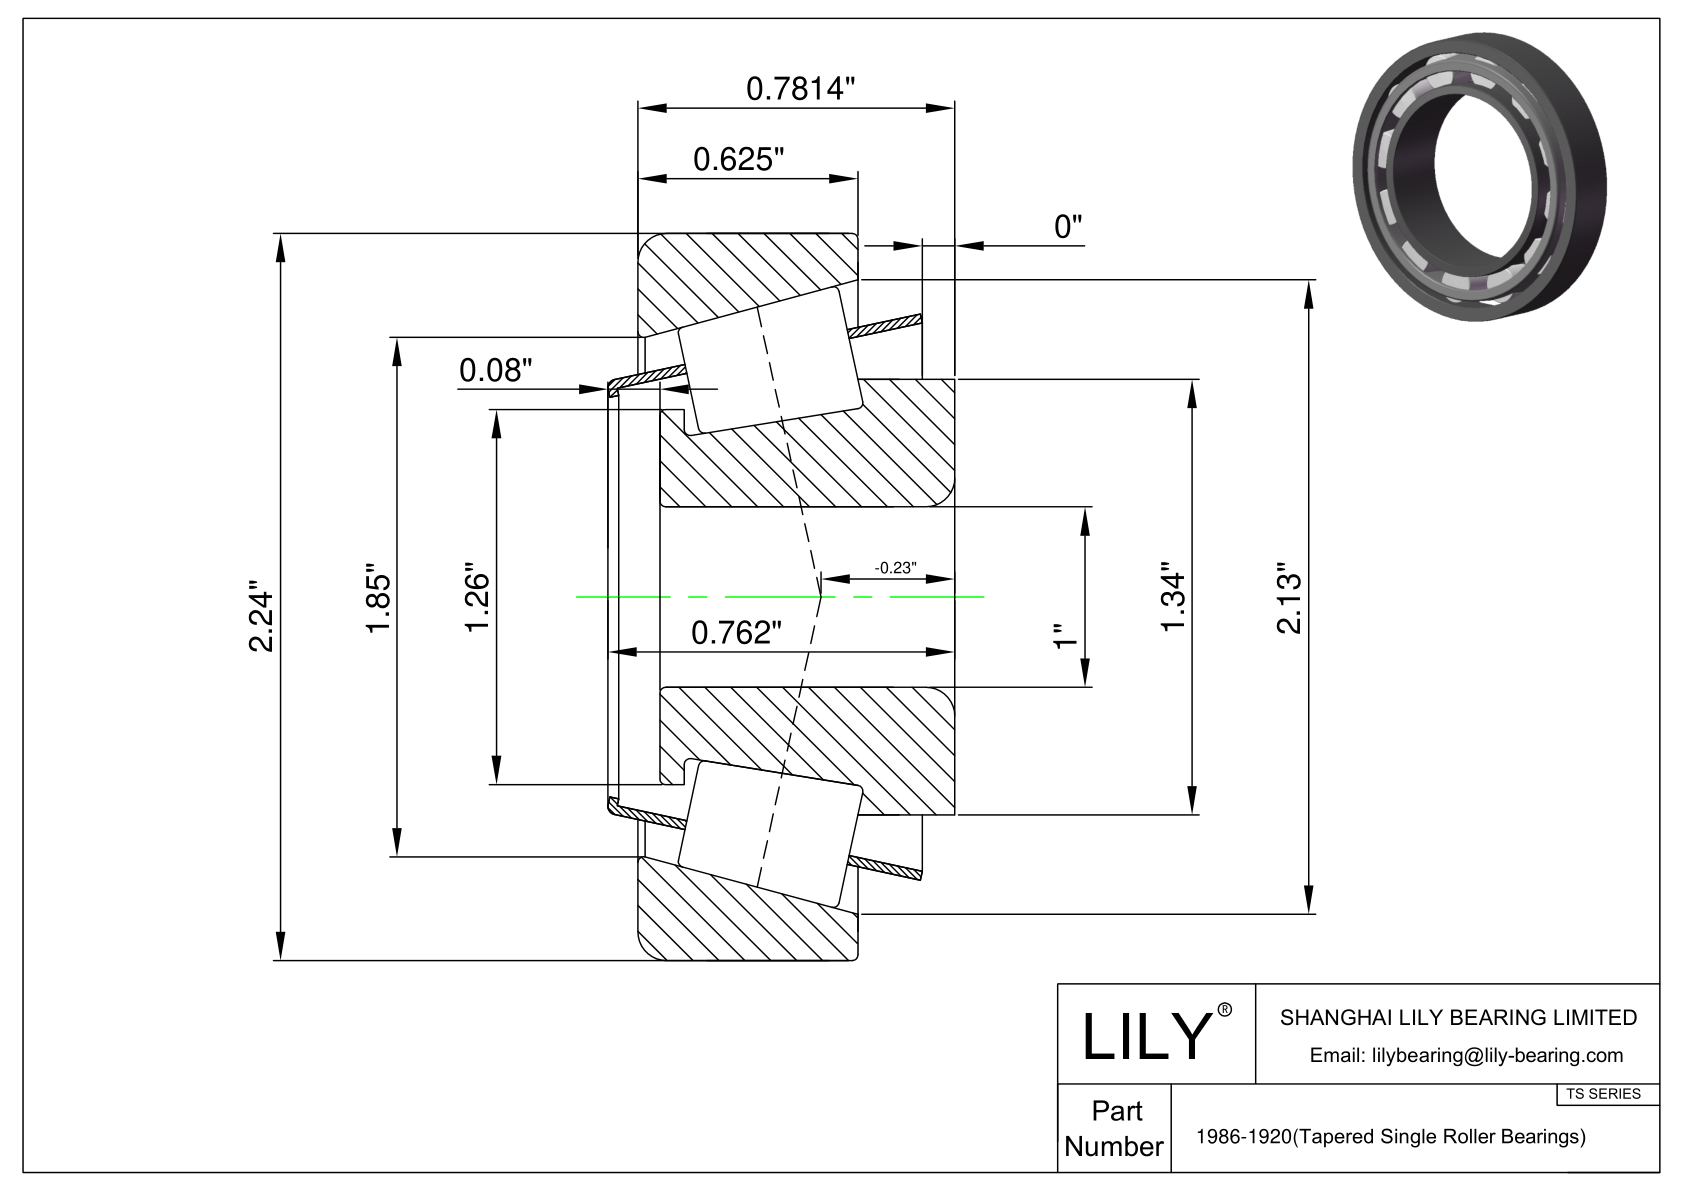 1986-1920 TS (Tapered Single Roller Bearings) (Imperial) cad drawing